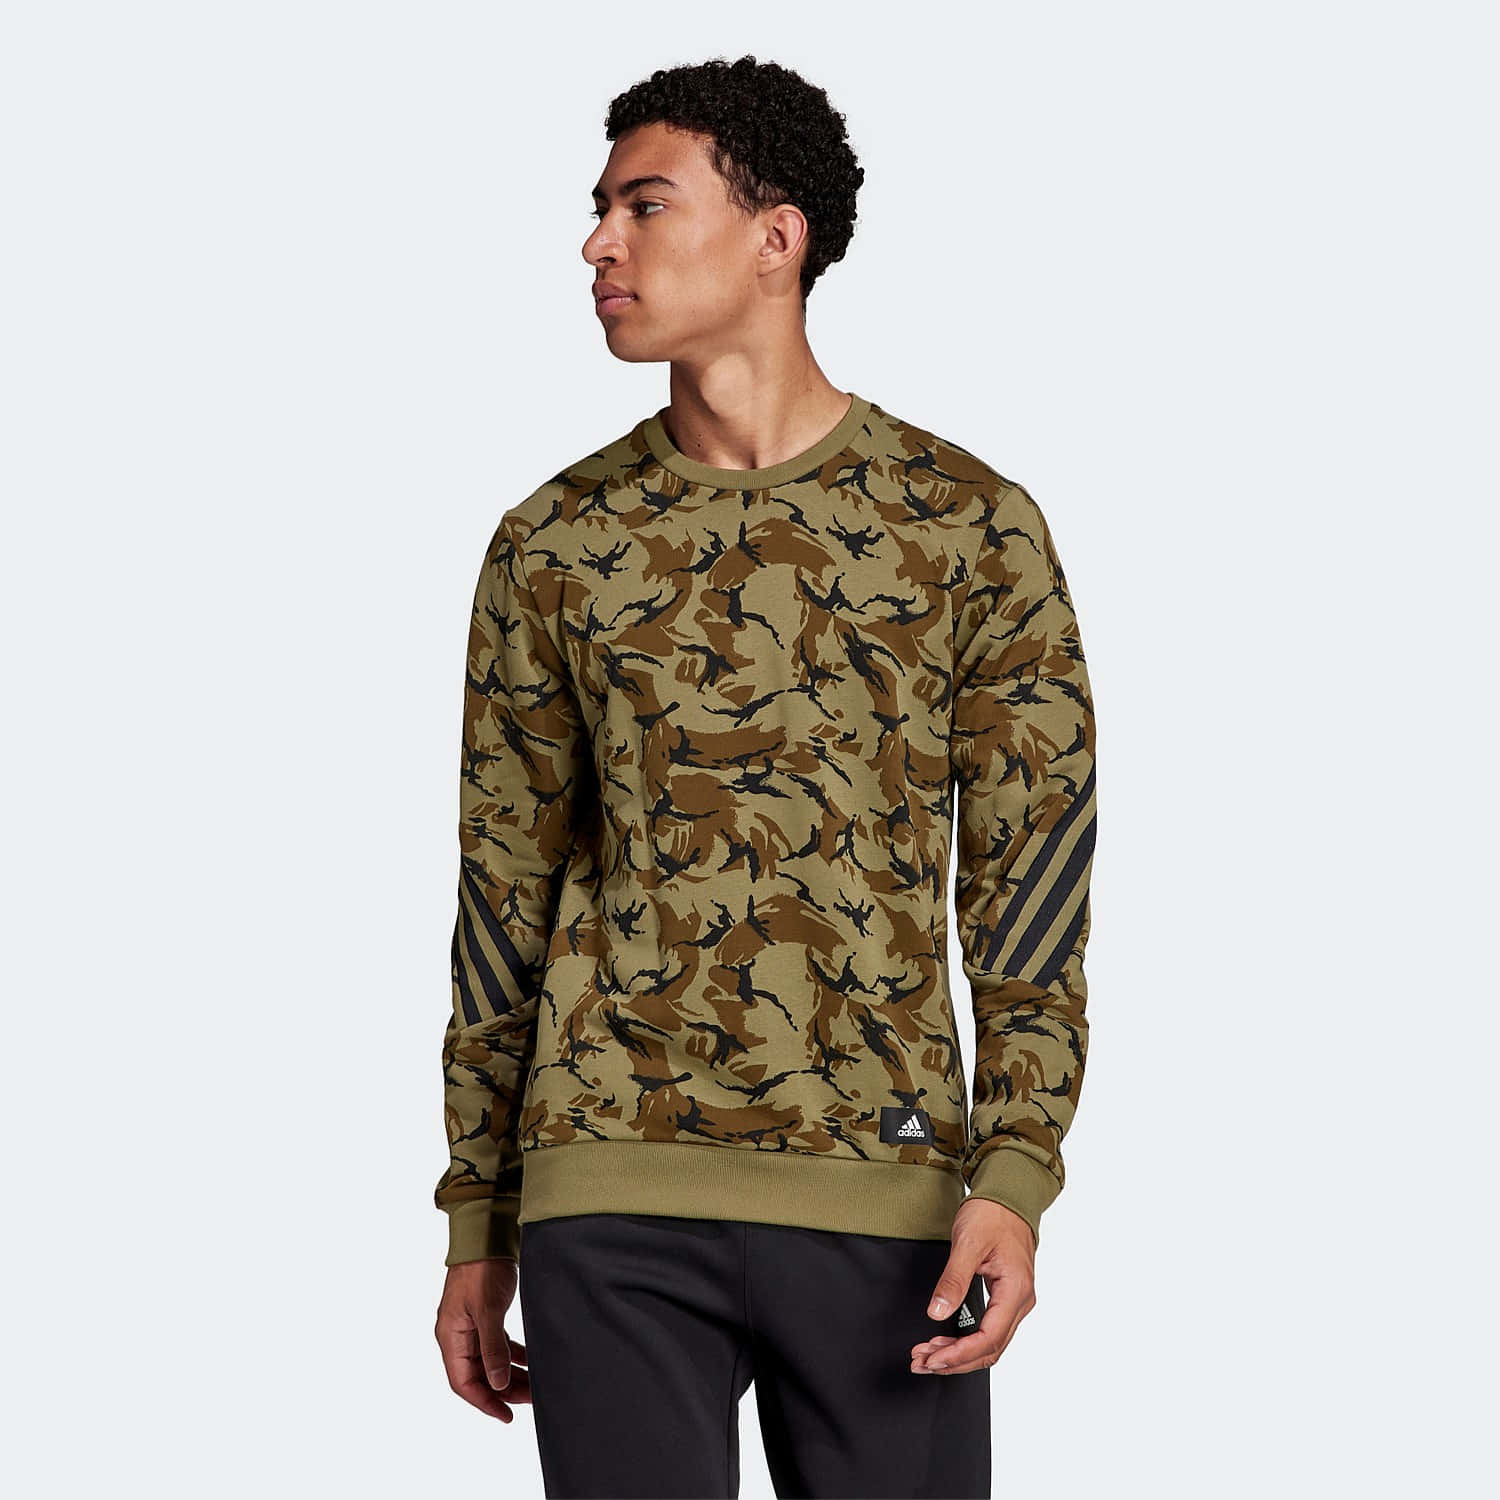 Unleash Your Wild Side with Camo